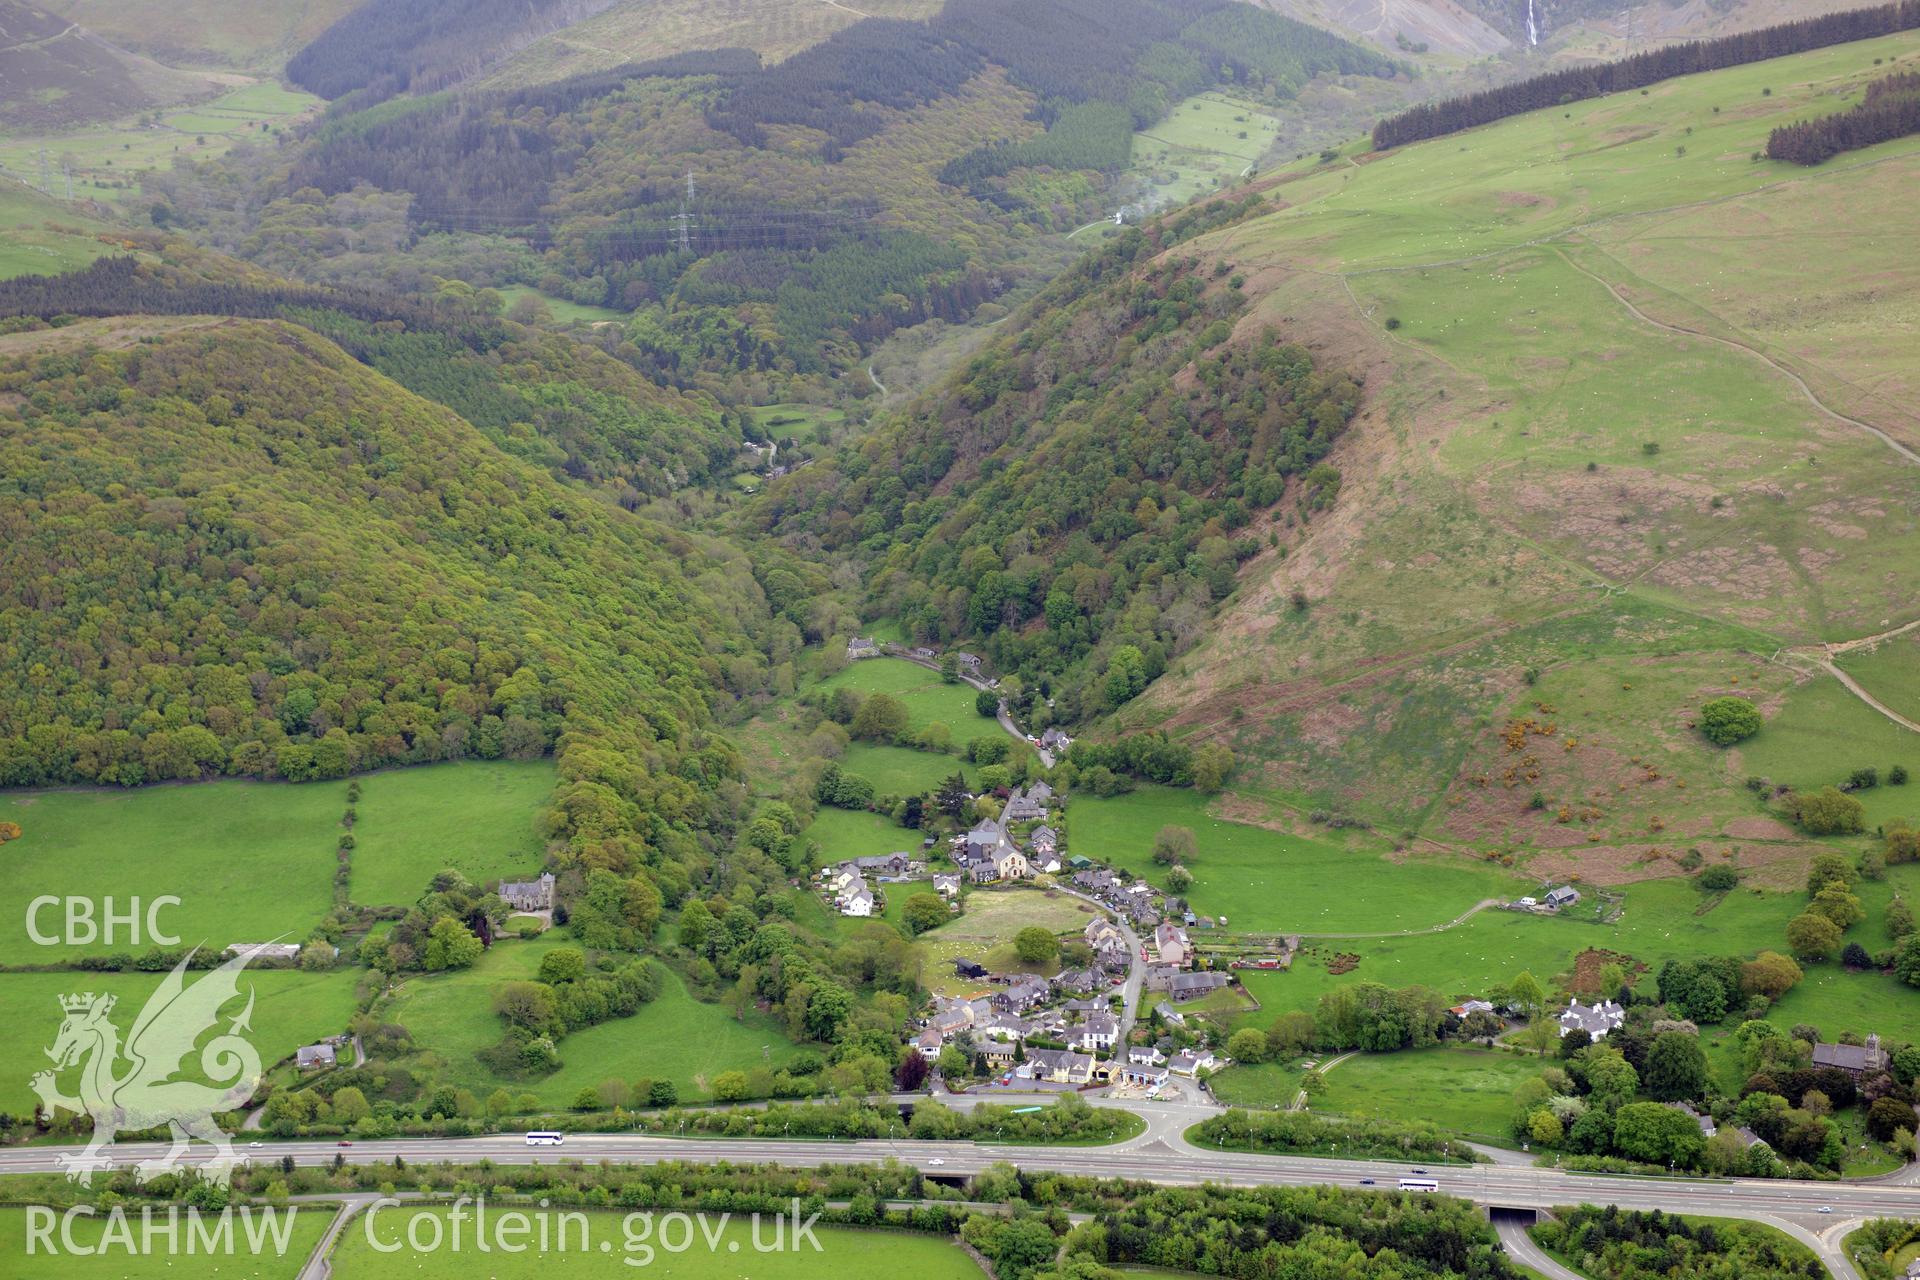 The village of Abergwyngregyn, Aber castle, and the Llys at Abergwyngregyn. Oblique aerial photograph taken during the Royal Commission?s programme of archaeological aerial reconnaissance by Toby Driver on 22nd May 2013.